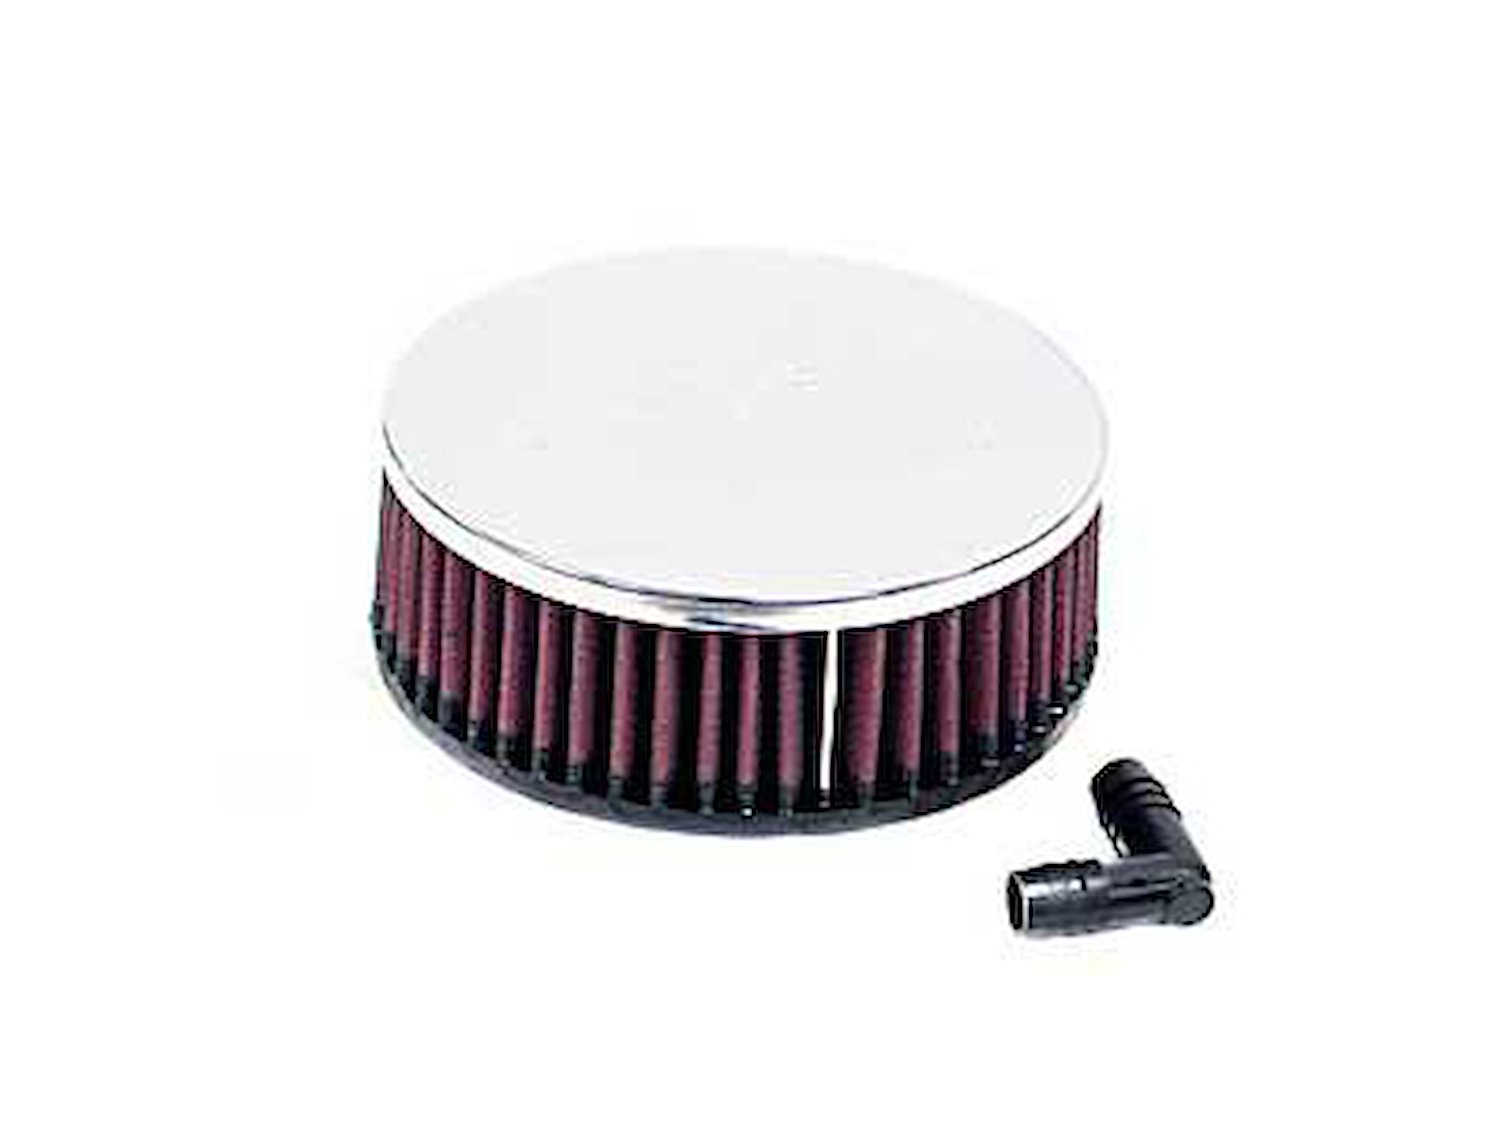 Round Straight Air Filter Flange Dia. (F): 2.563" (65 mm)